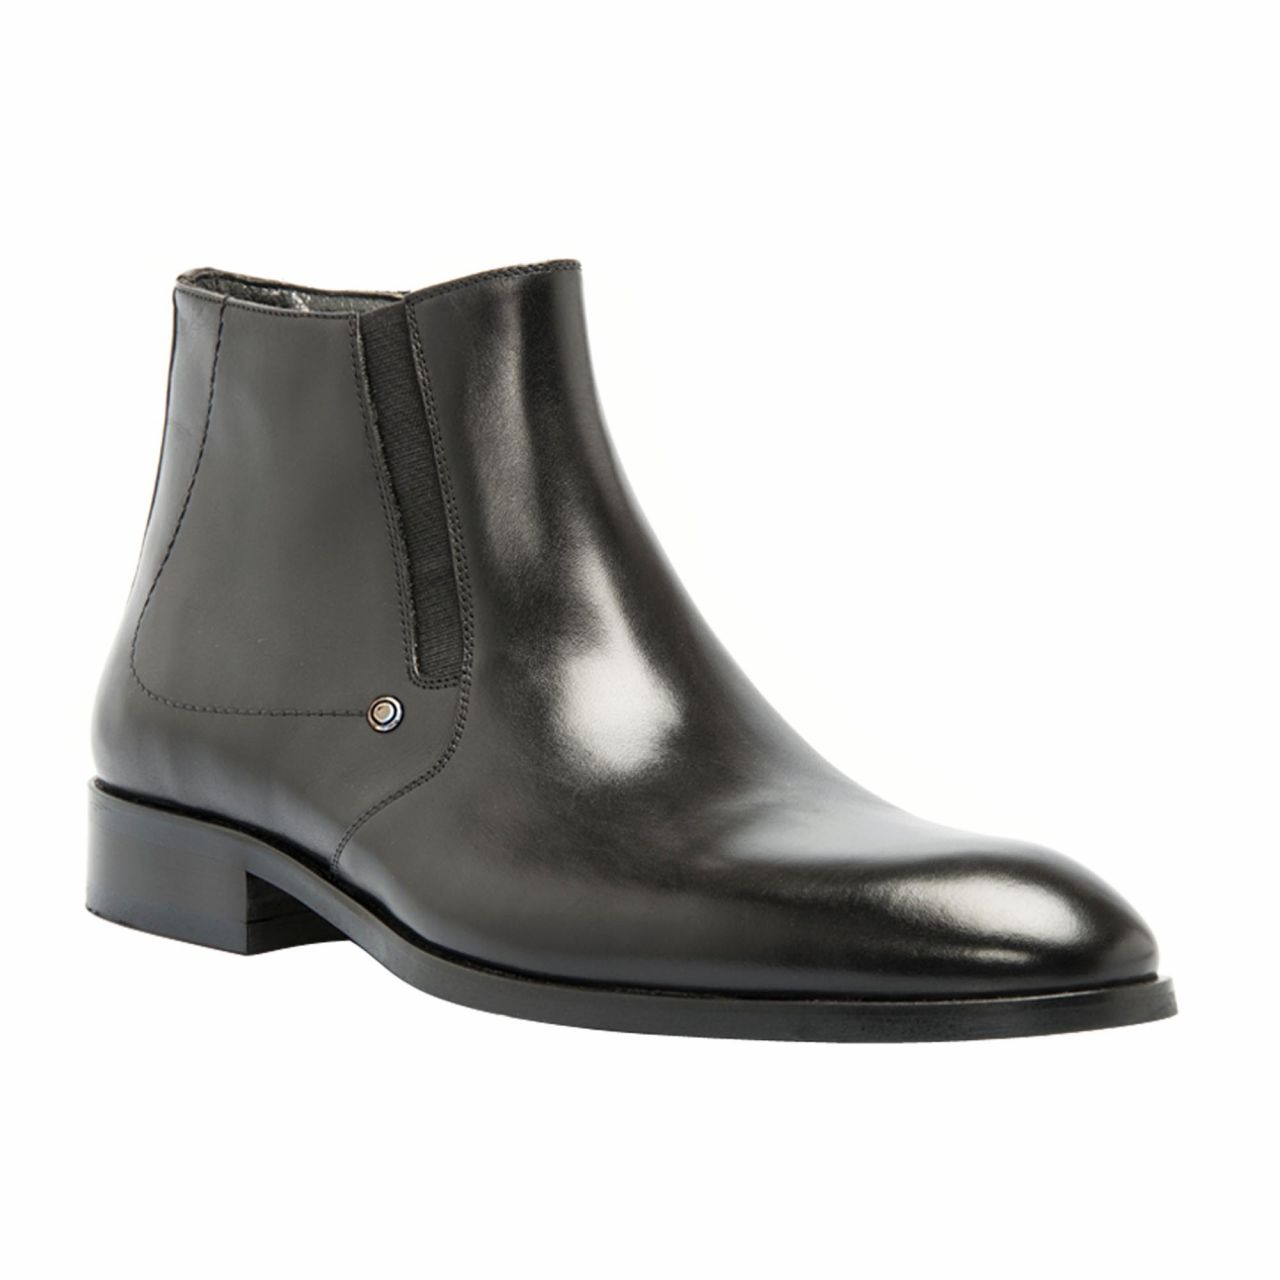 Men's Leather Classic Ankle Boots